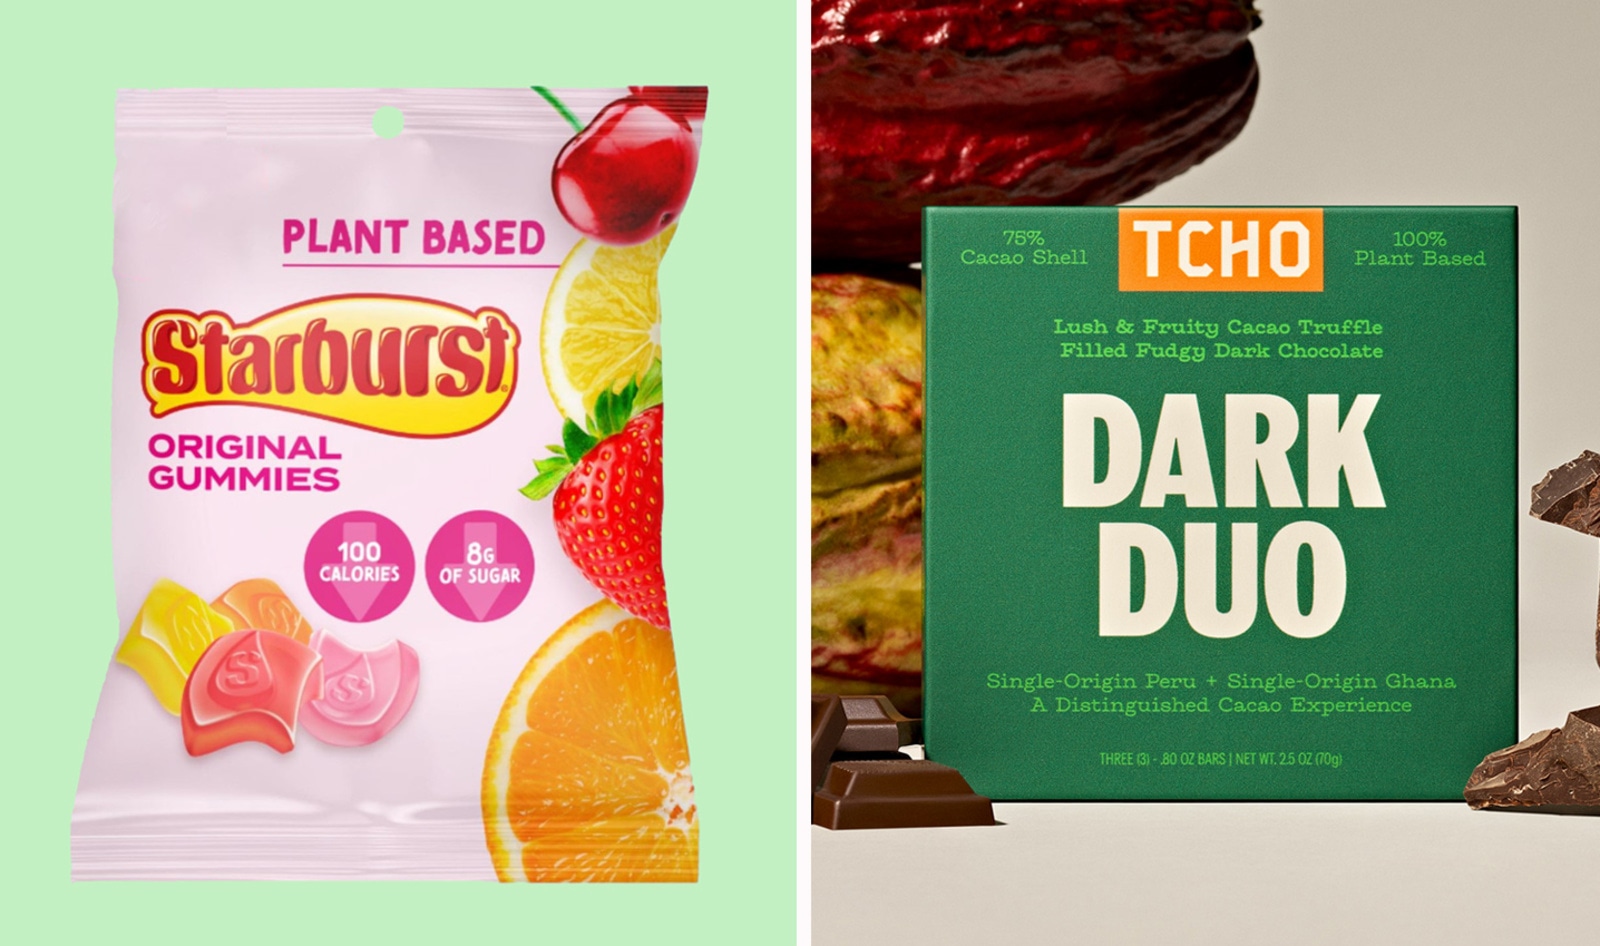 Gelatin-Free Starburst Is Coming Your Way and More Vegan Food News of the Week